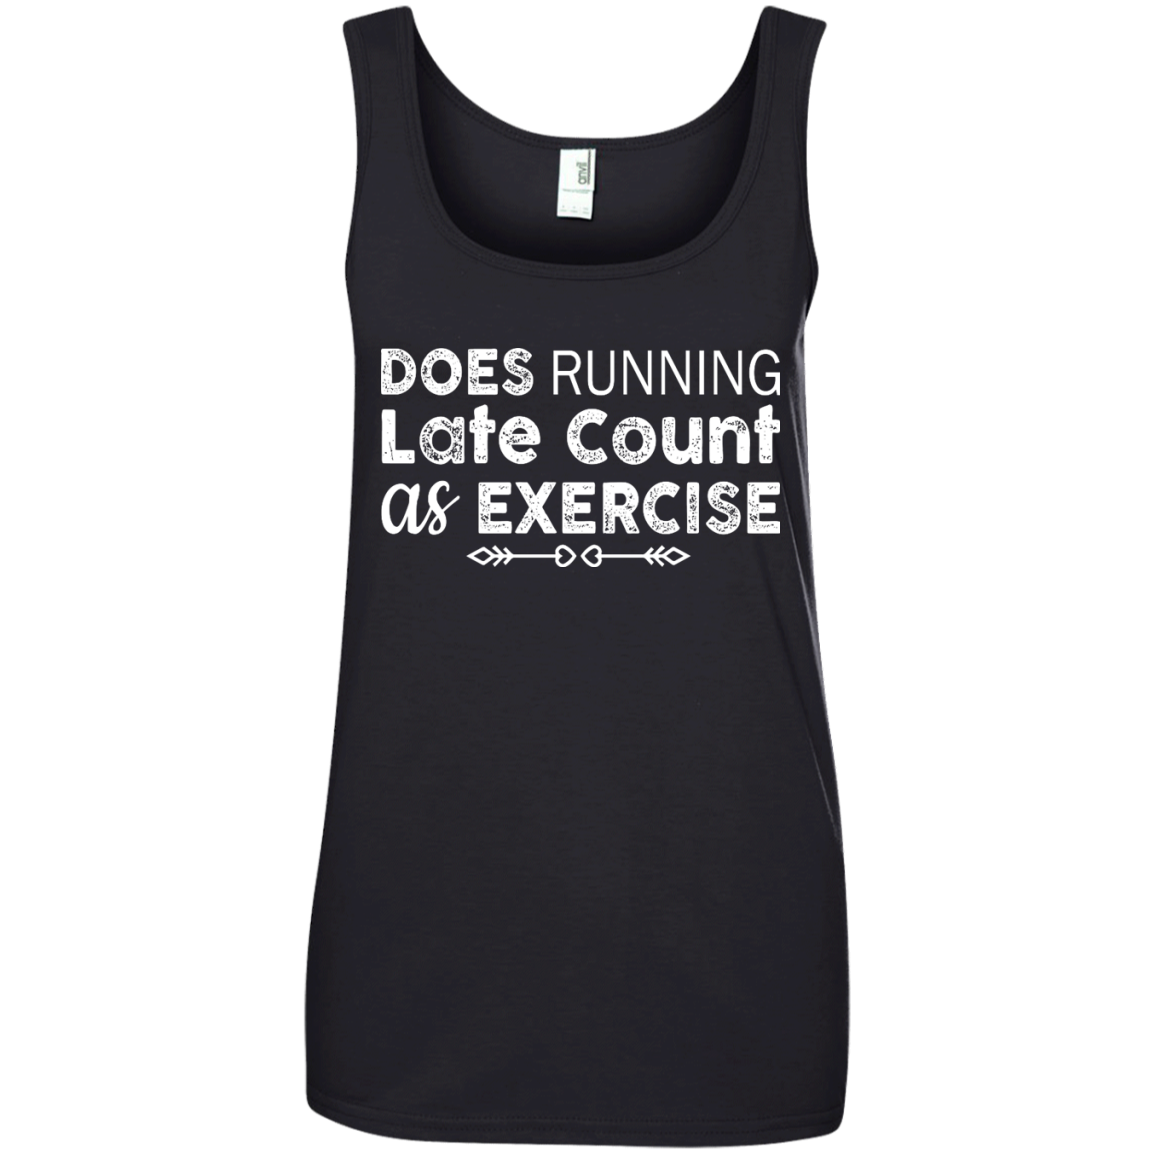 Does Running late count as exercise shirt, sweater, tank